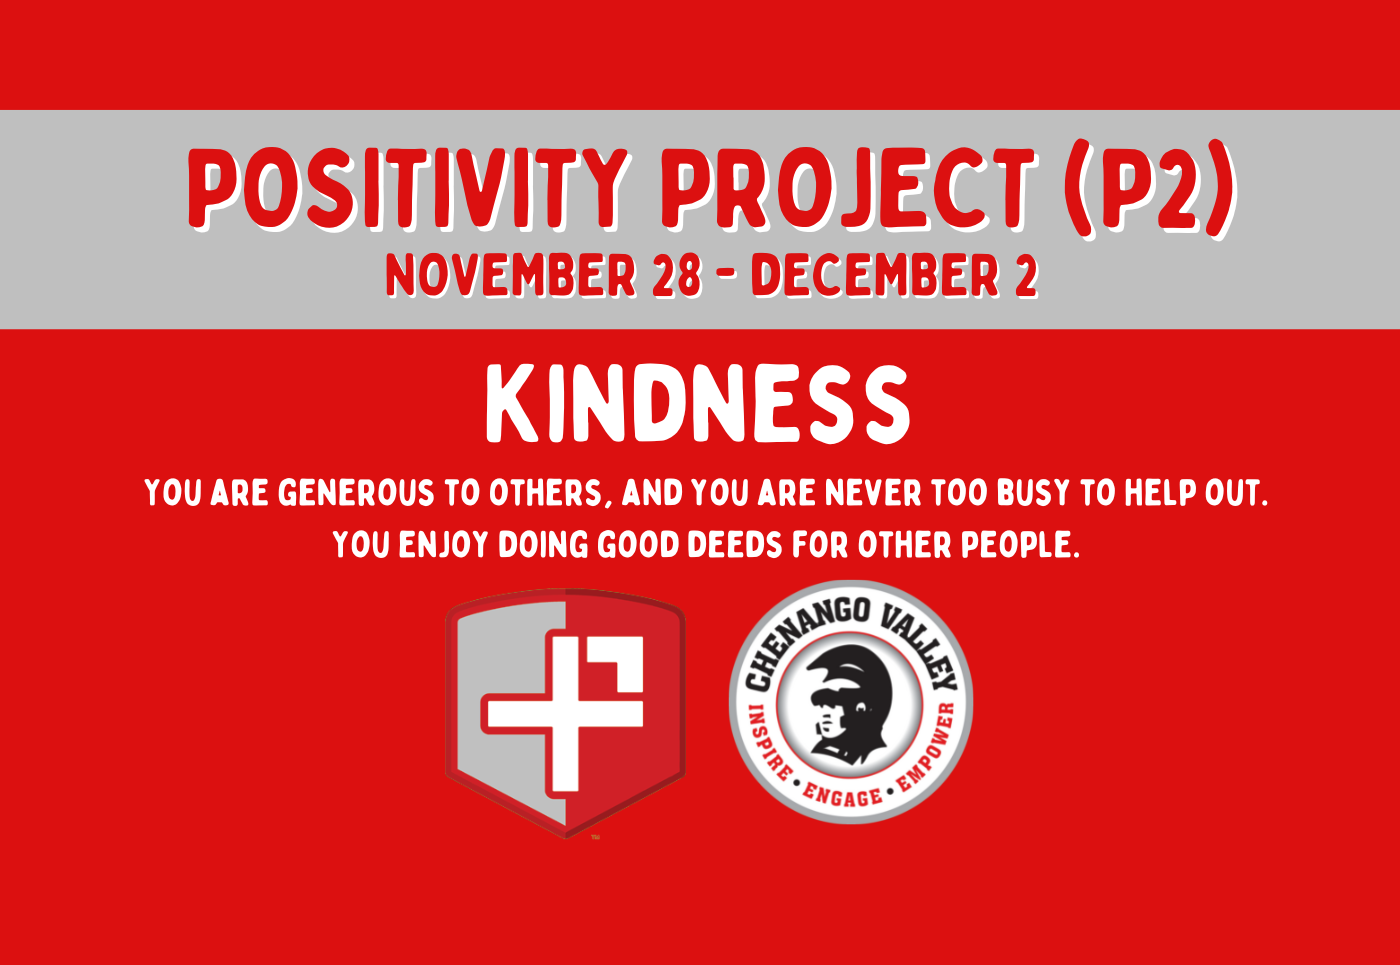 p 2 character strength - kindness